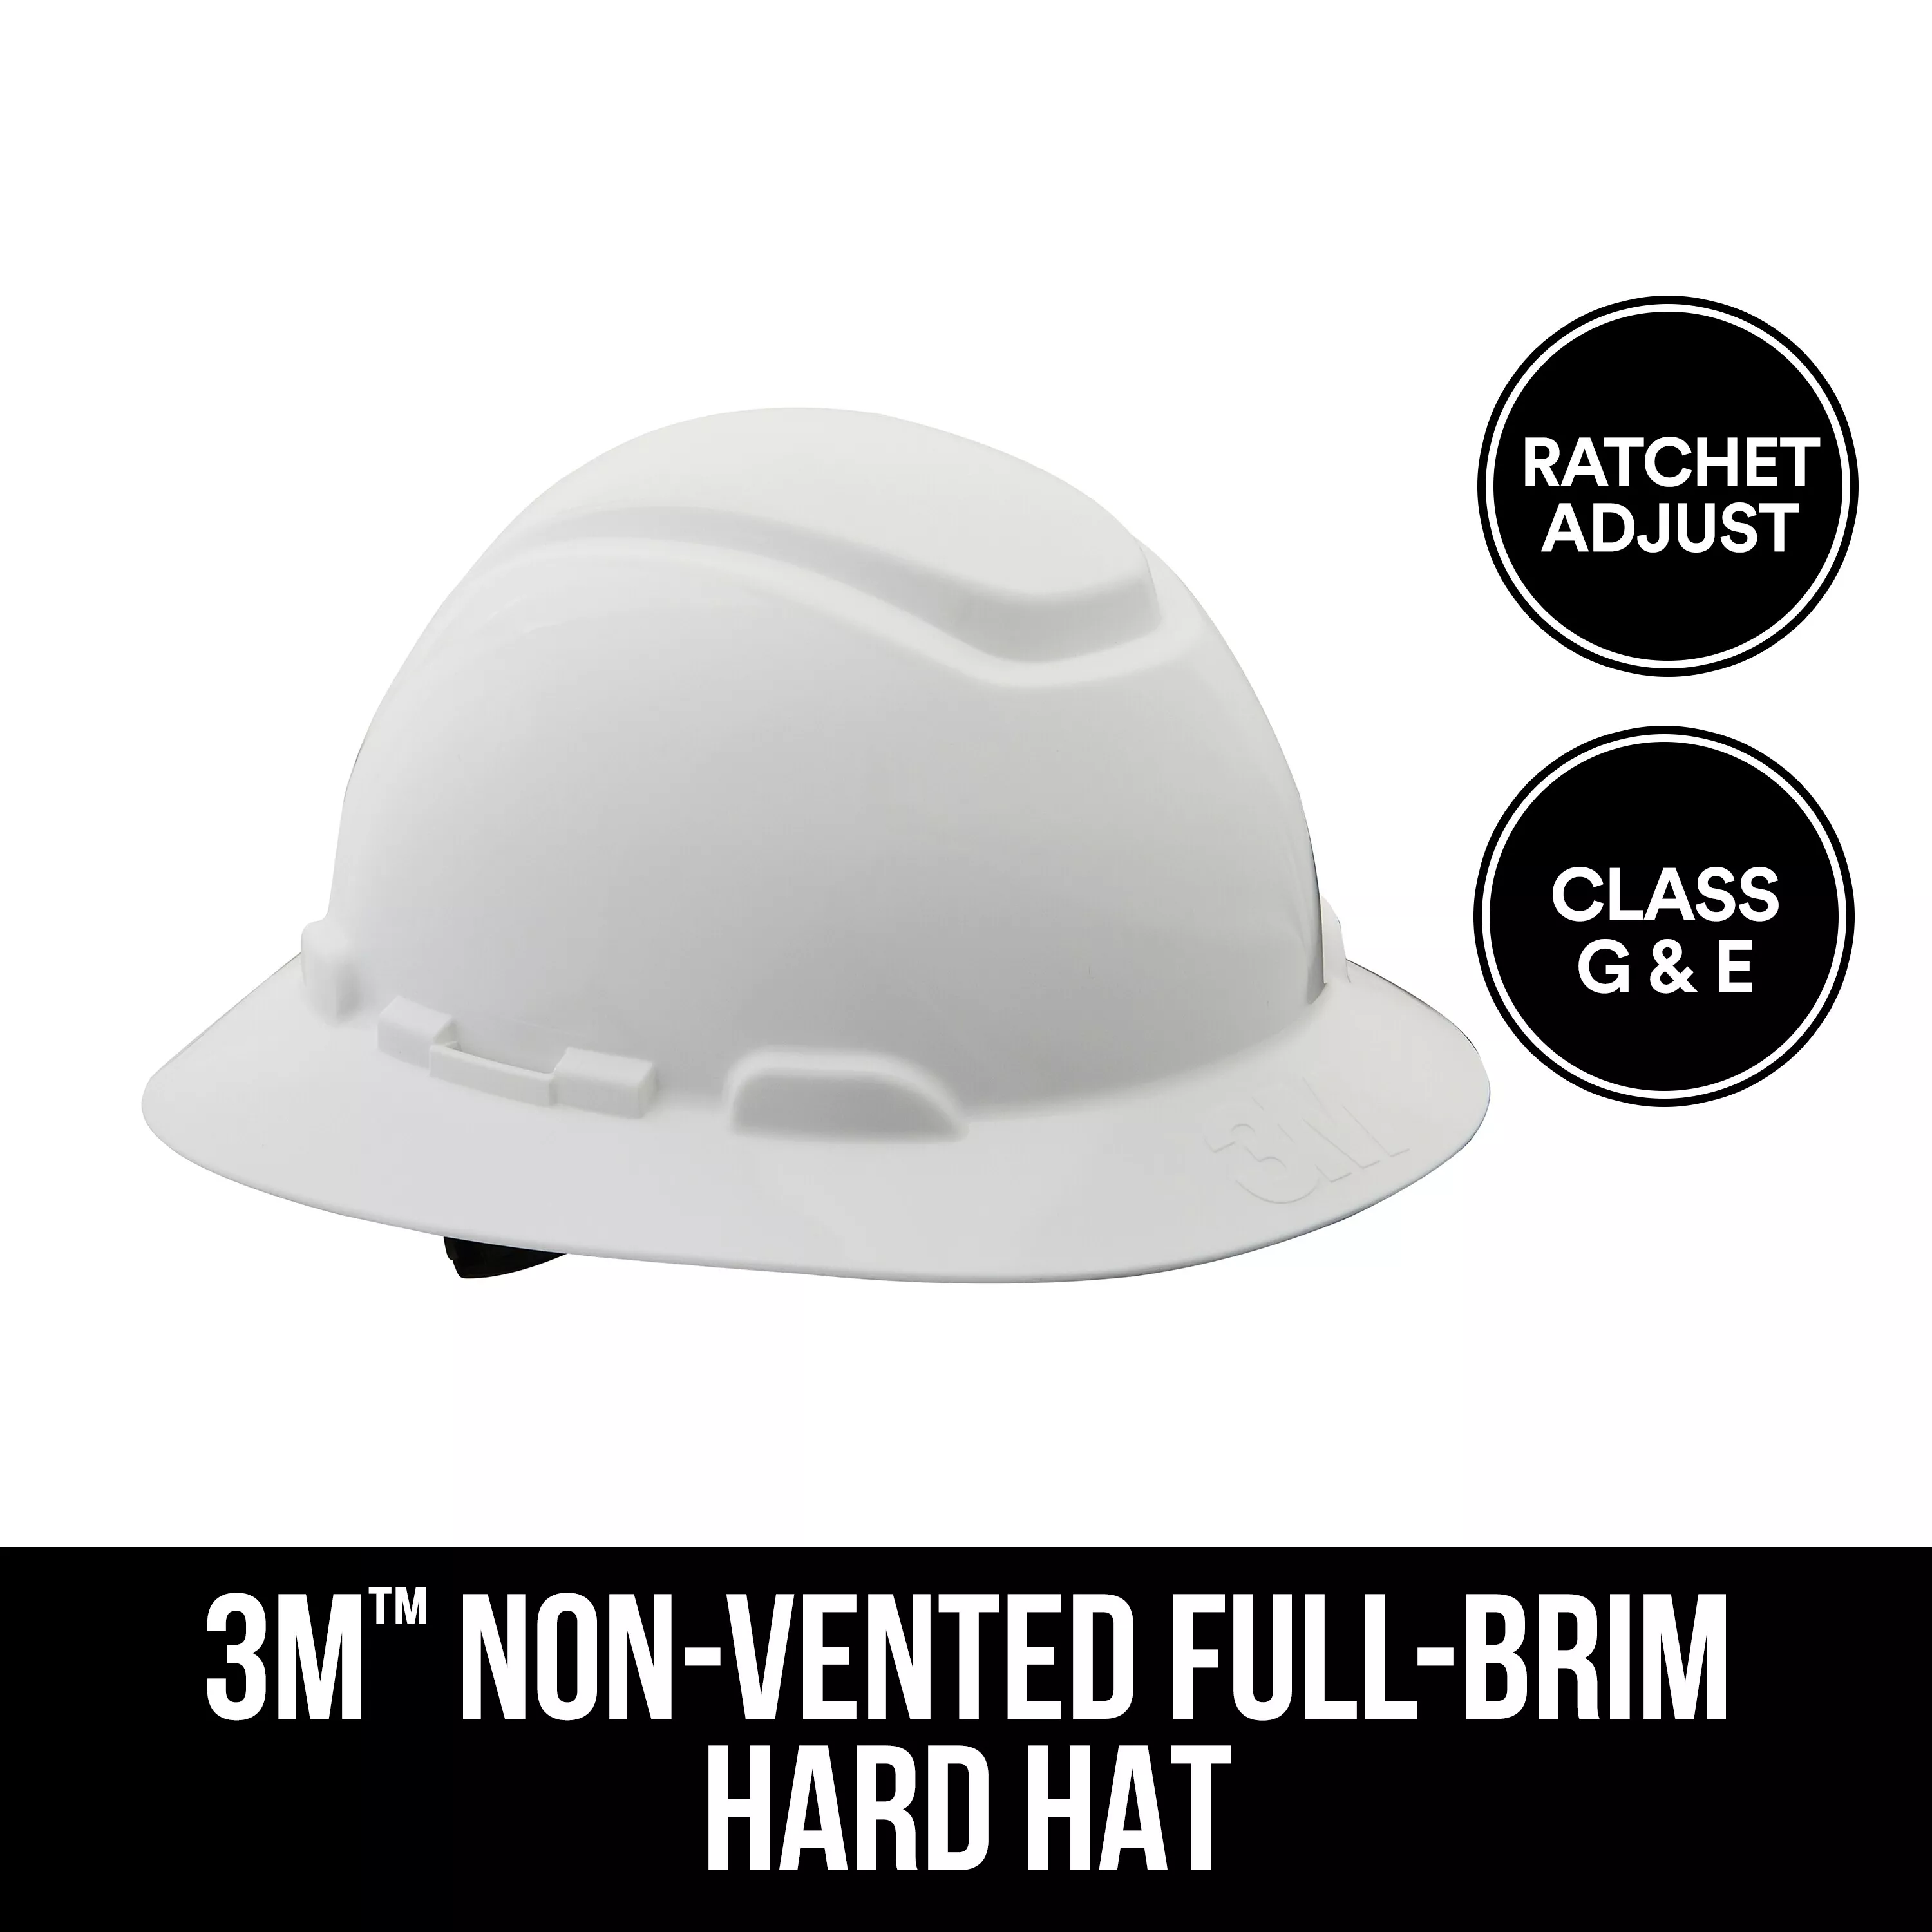 3M™ Full-Brim Non-Vented Hard Hat with Ratchet Adjustment,
CHH-FB-R-W6-PS, 6/case